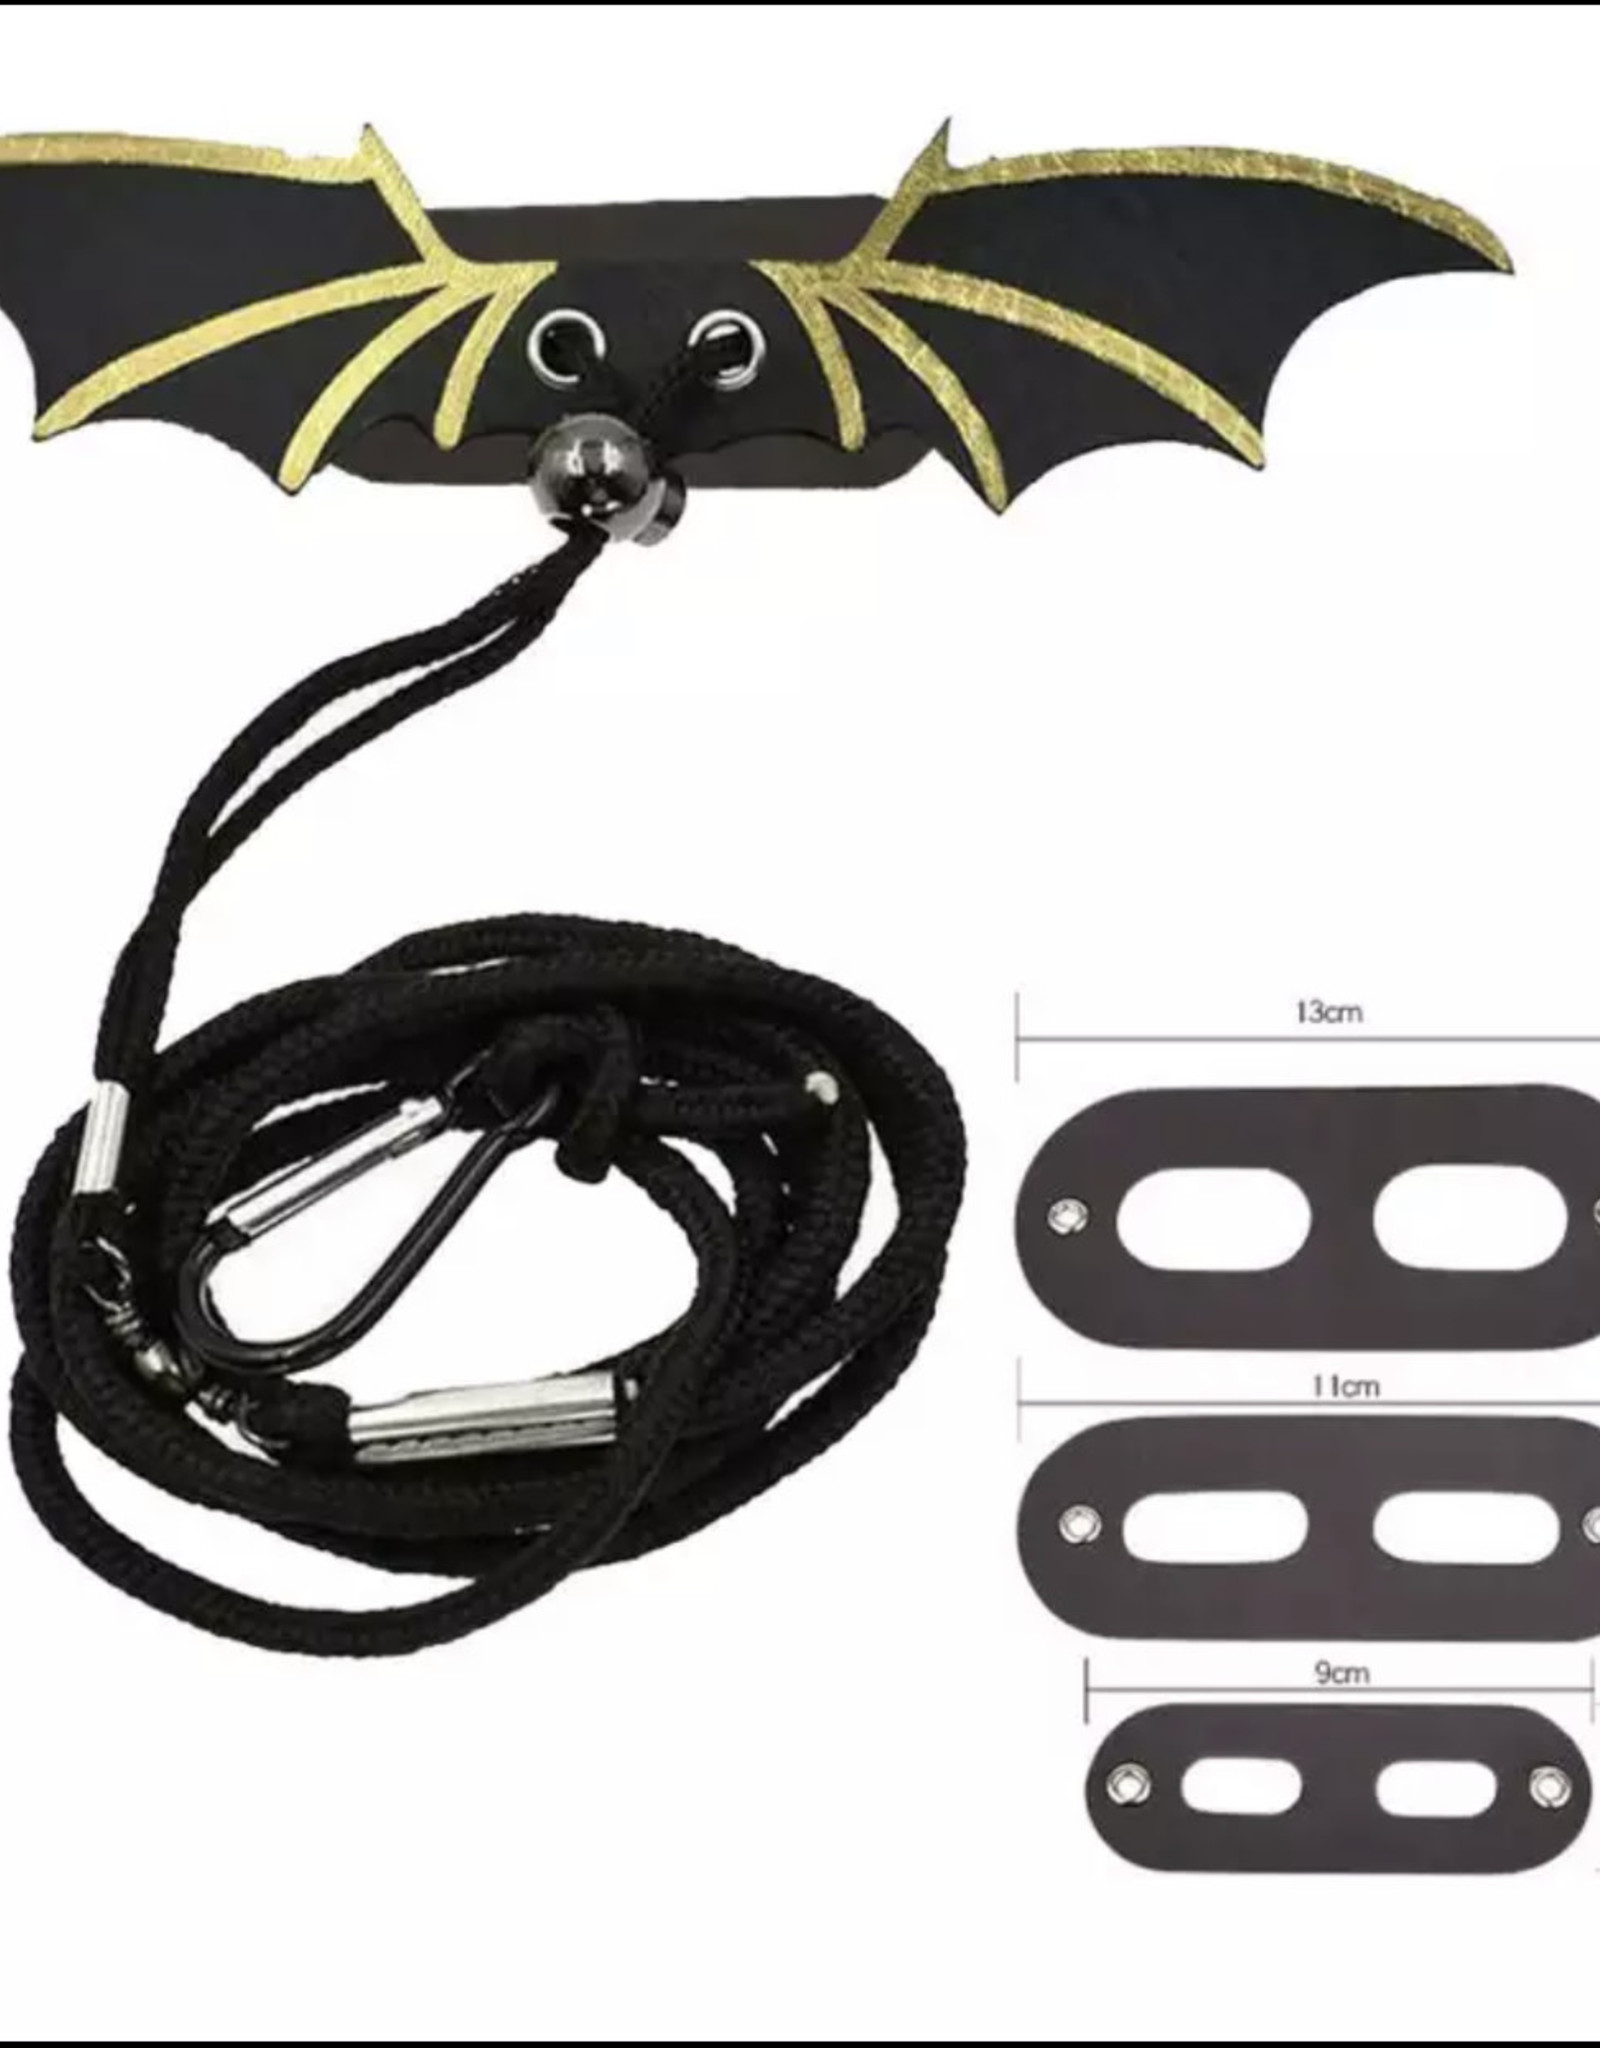 REPTILE ADJUSTABLE HARNESS/LEASH WITH WINGS- BLACK AND GOLD *THIS SET HAS 3 SIZES